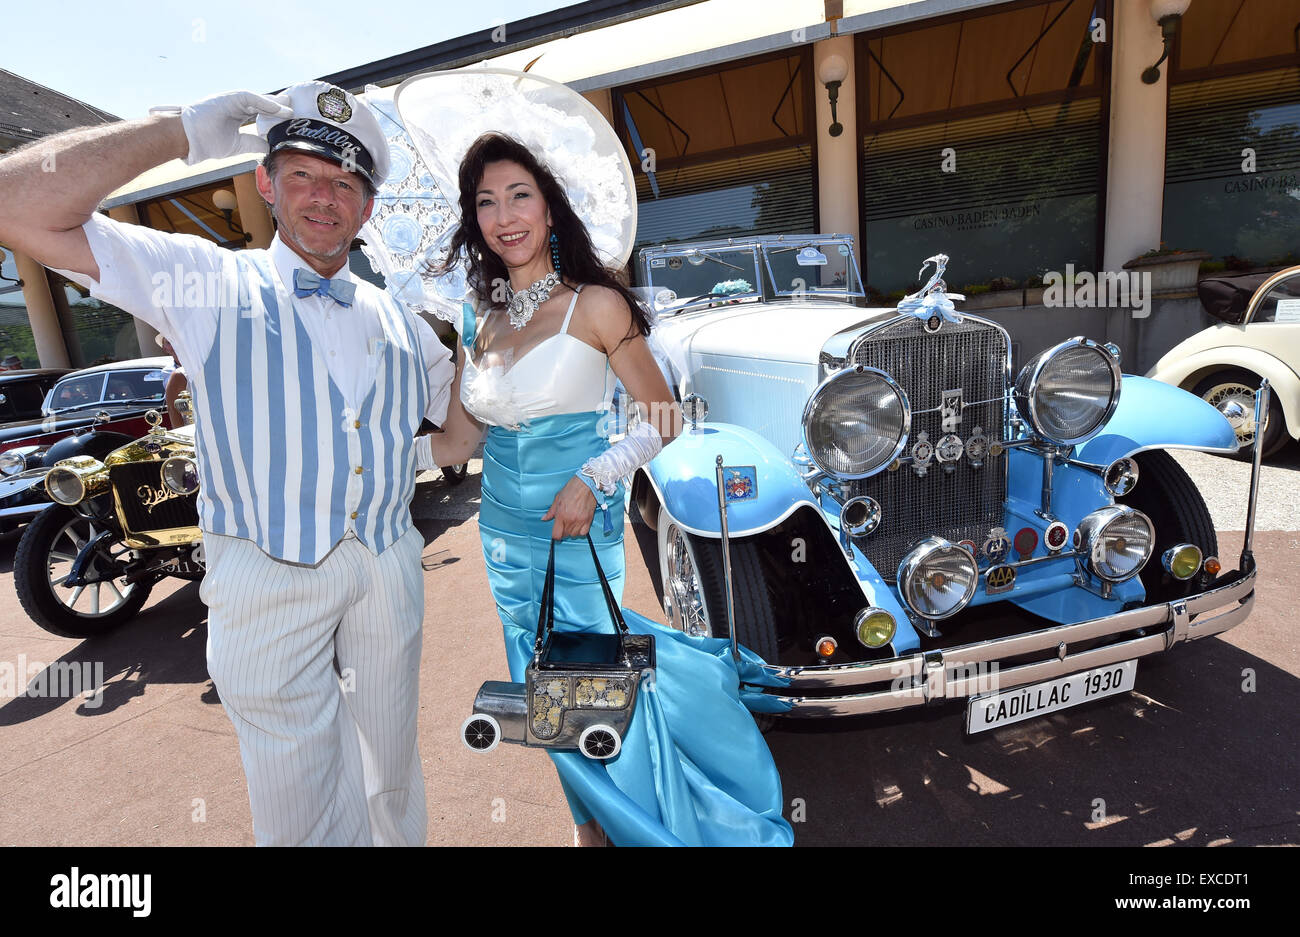 Baden-Baden, Germany. 11th July, 2015. Andreas Wietzke and Esther Bernd stand in front of a 1930 Cadillac Imperial at the 39th vintage car show 'International Oldtimer-Meeting' in Baden-Baden, Germany, 11 July 2015. 400 classic cars will be showcased during the exhibition held from 10 to 12 July. PHOTO: ULI DECK/dpa/Alamy Live News Stock Photo